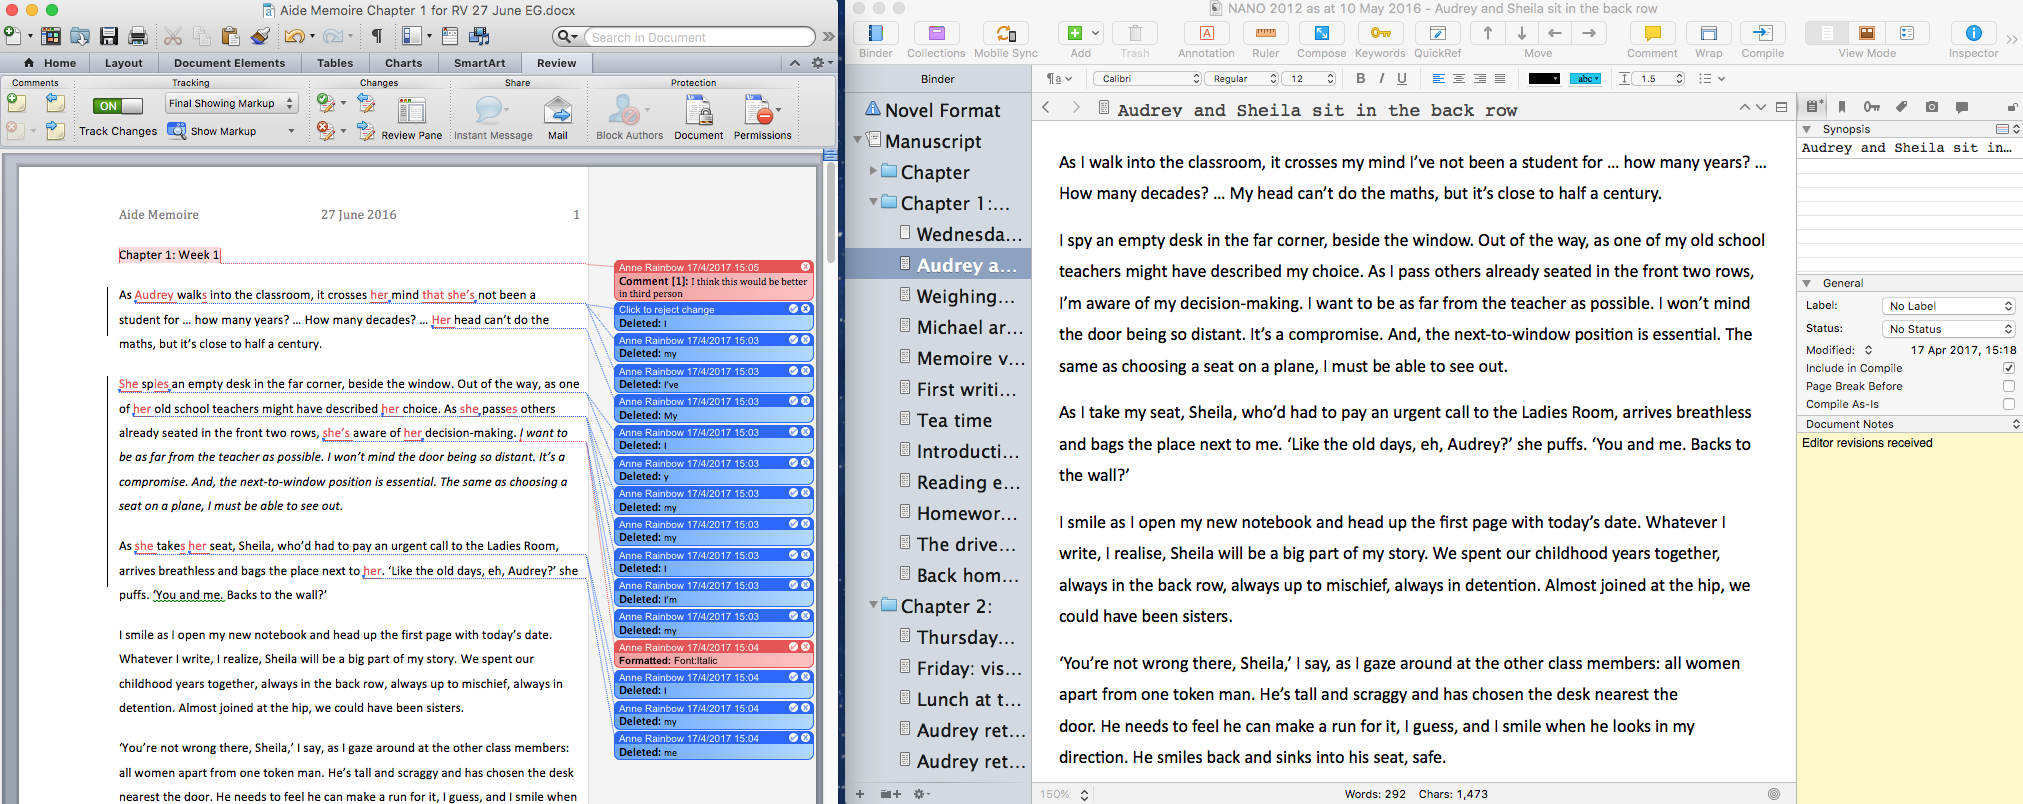 Parallel working | Adopting the Scrivener Mindset: a guide for writers